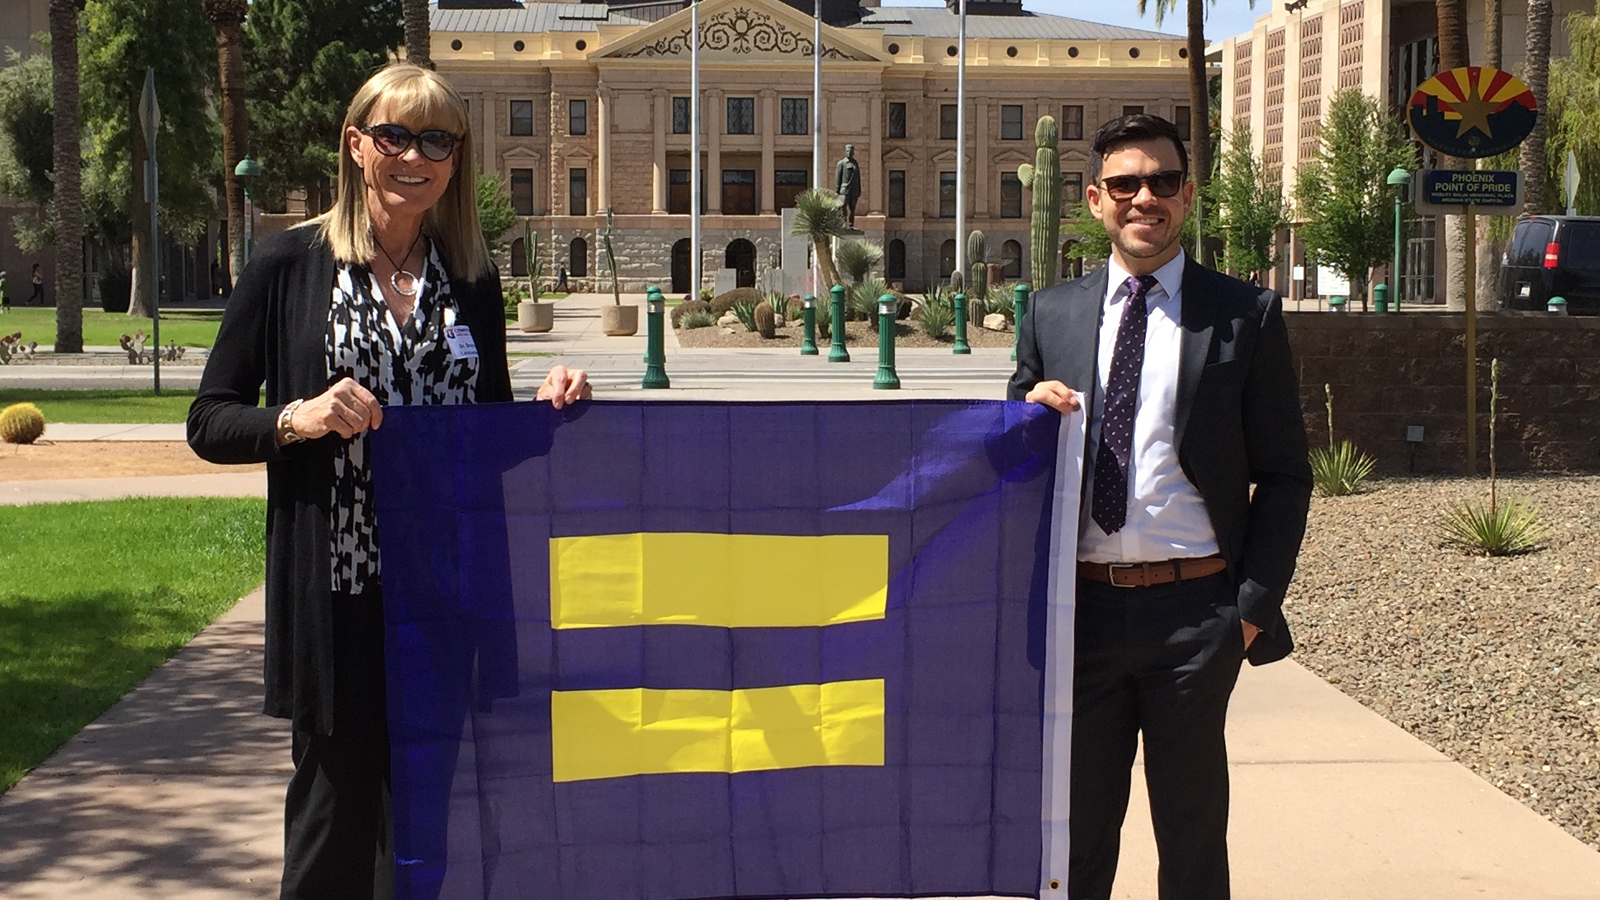 Hrc Members And Supporters Gather For Equality Day In Arizona Human Rights Campaign 8966